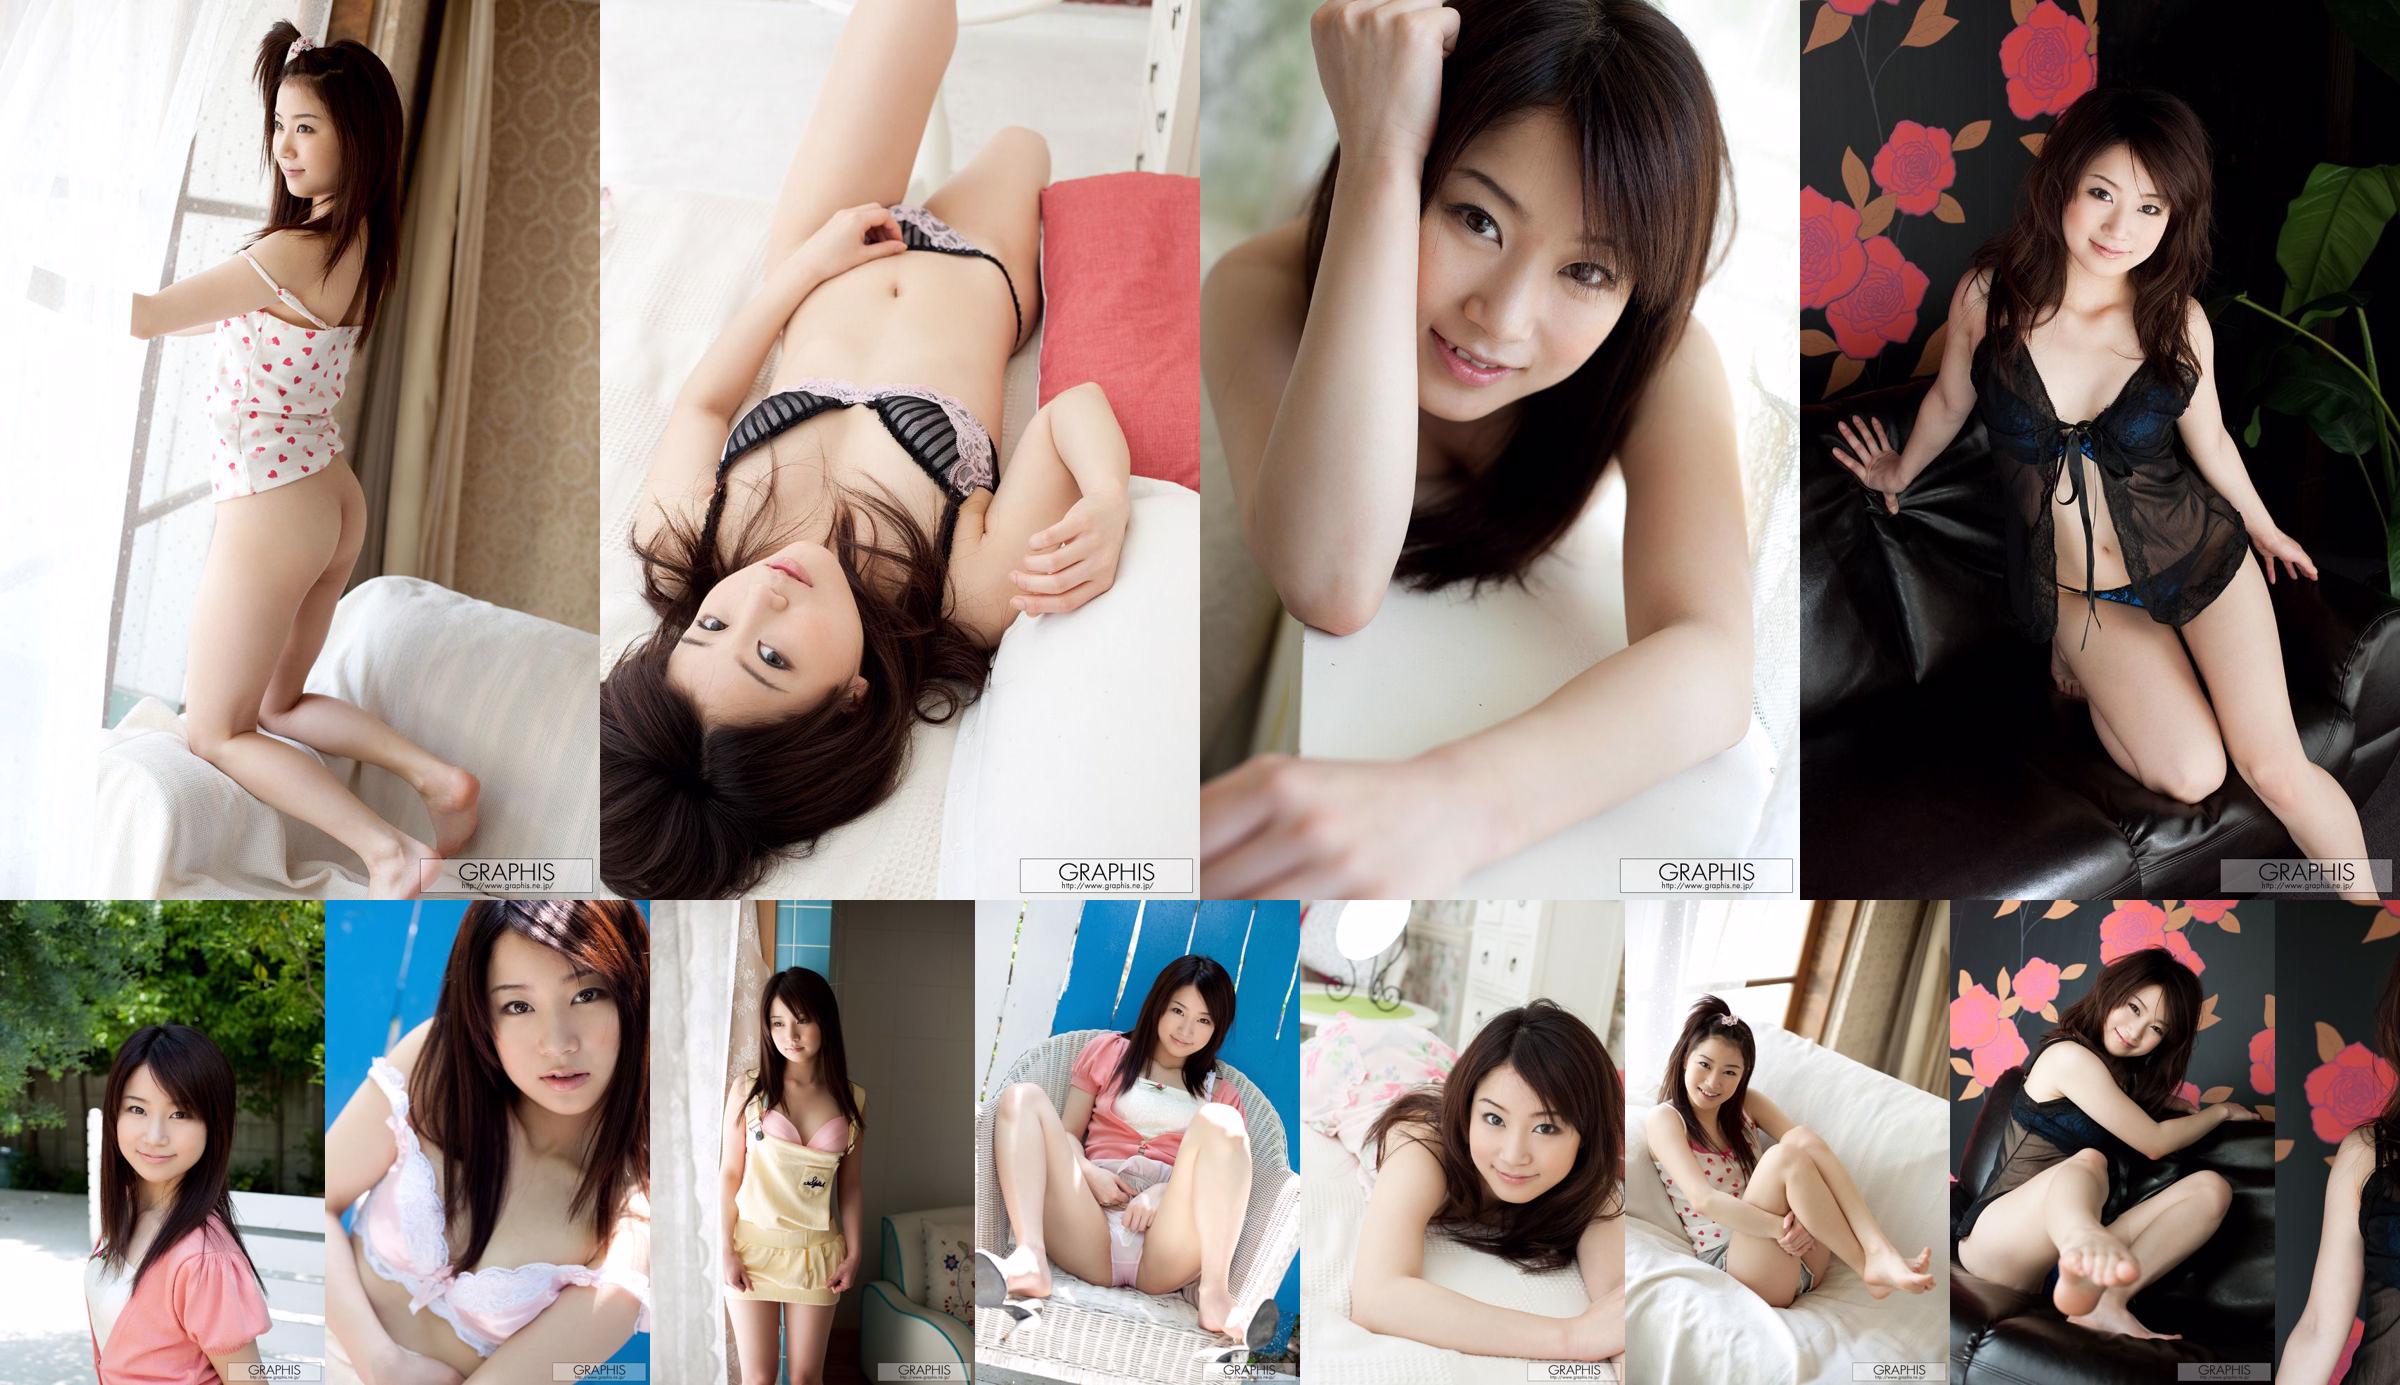 Aiyin まひろ/ Aiyin Zhenxun "Sweet Candy" [Graphis] Gals No.40a46c Page 9